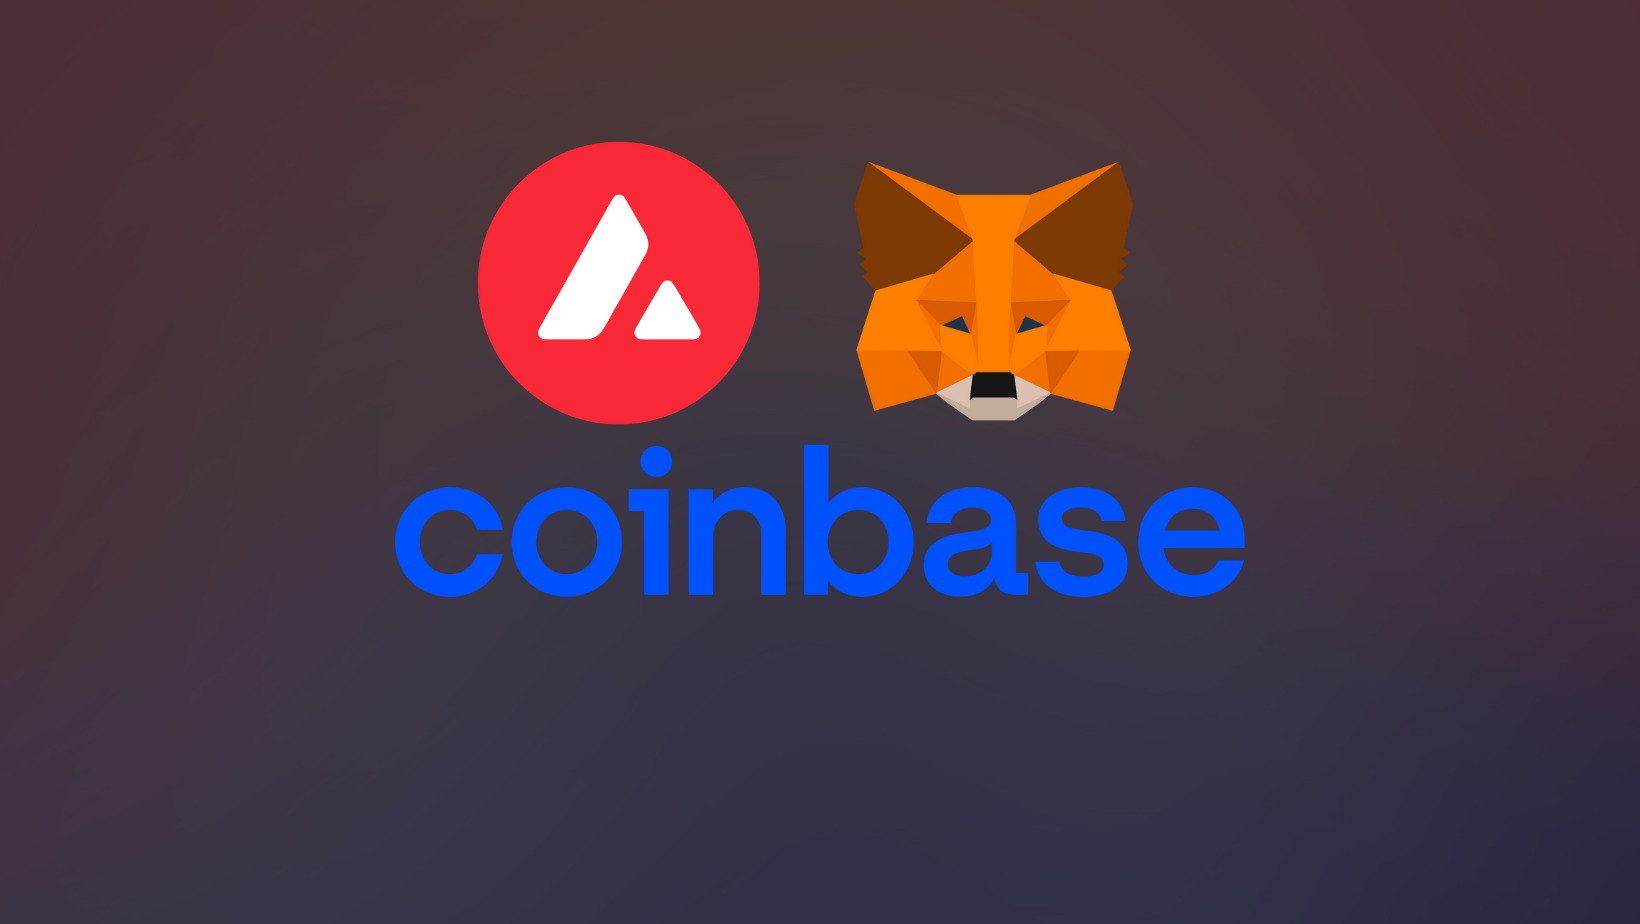 How to transfer Avax from Coinbase to Metamask